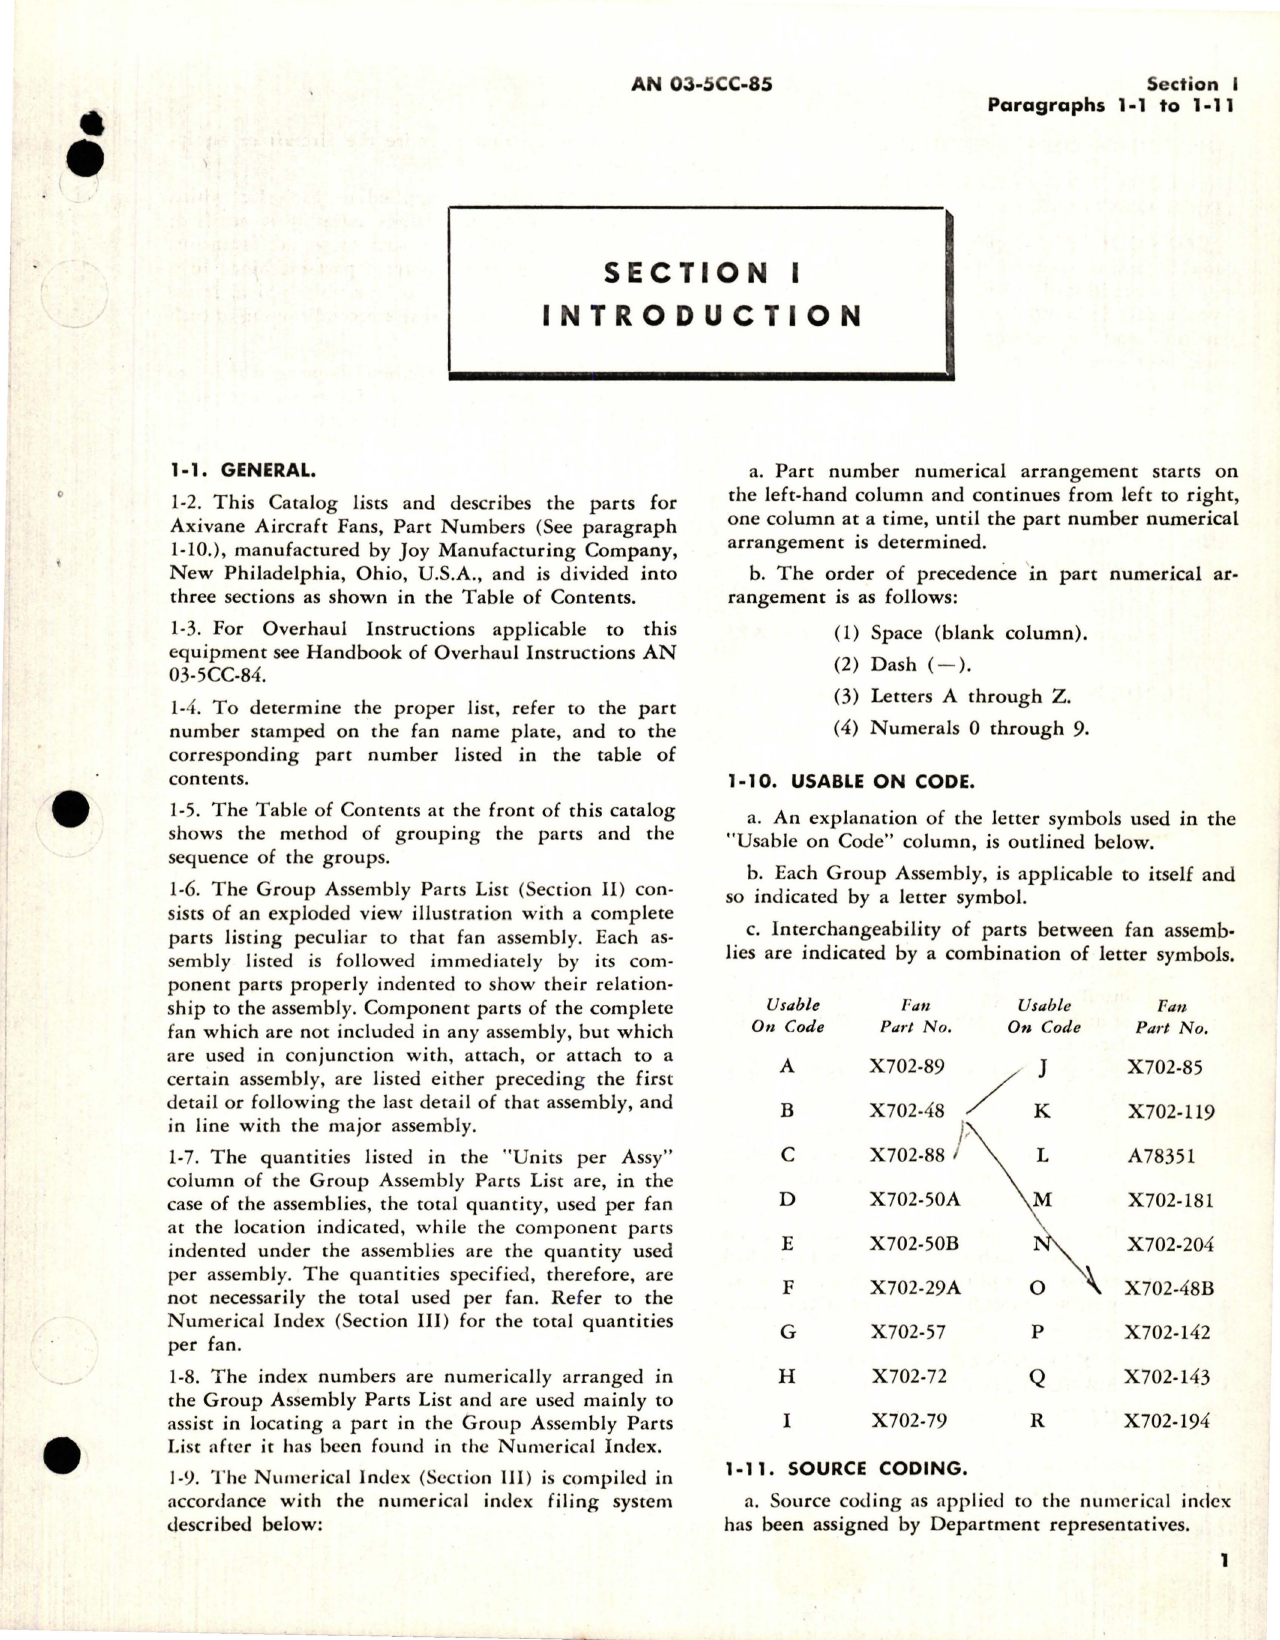 Sample page 5 from AirCorps Library document: Illustrated Parts Breakdown for Axivane Aircraft Fans